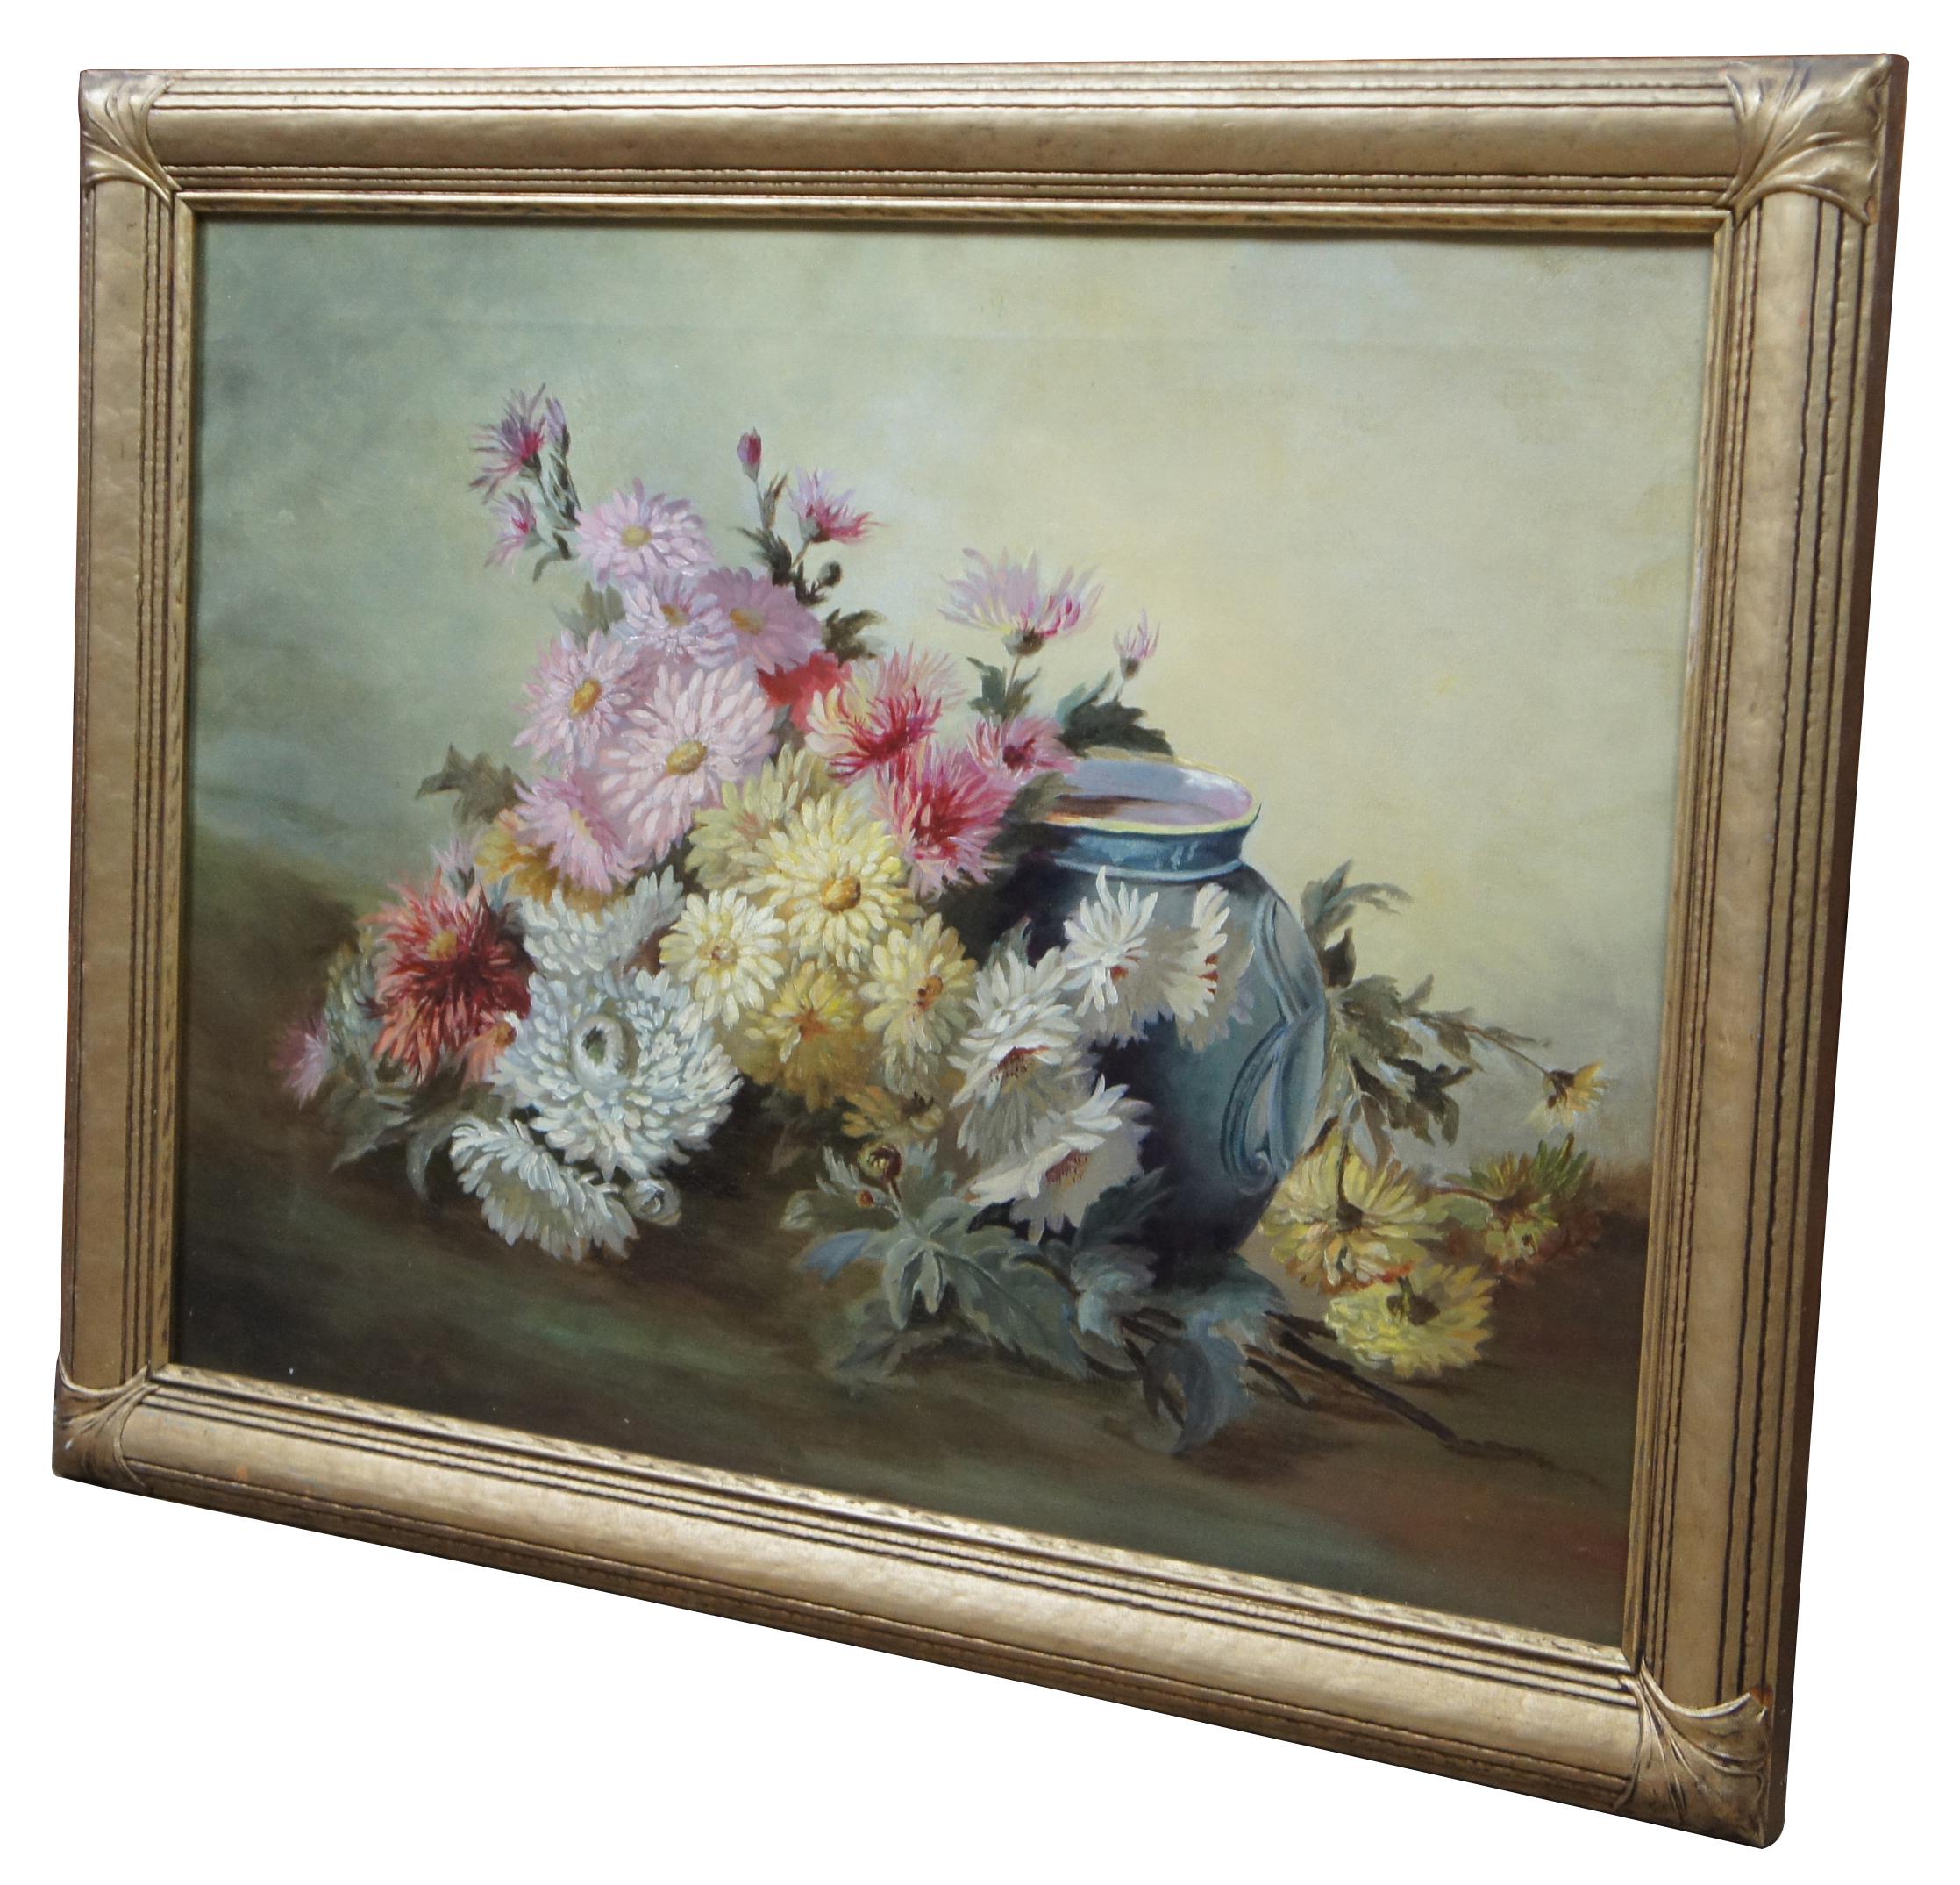 Late 19th-early 20th century still life painting. Features a colorful array of peonies next to a blue porcelain vase. Includes an Art Deco era wooden frame finished in gold.
      
Sans Frame - 23” x 17”